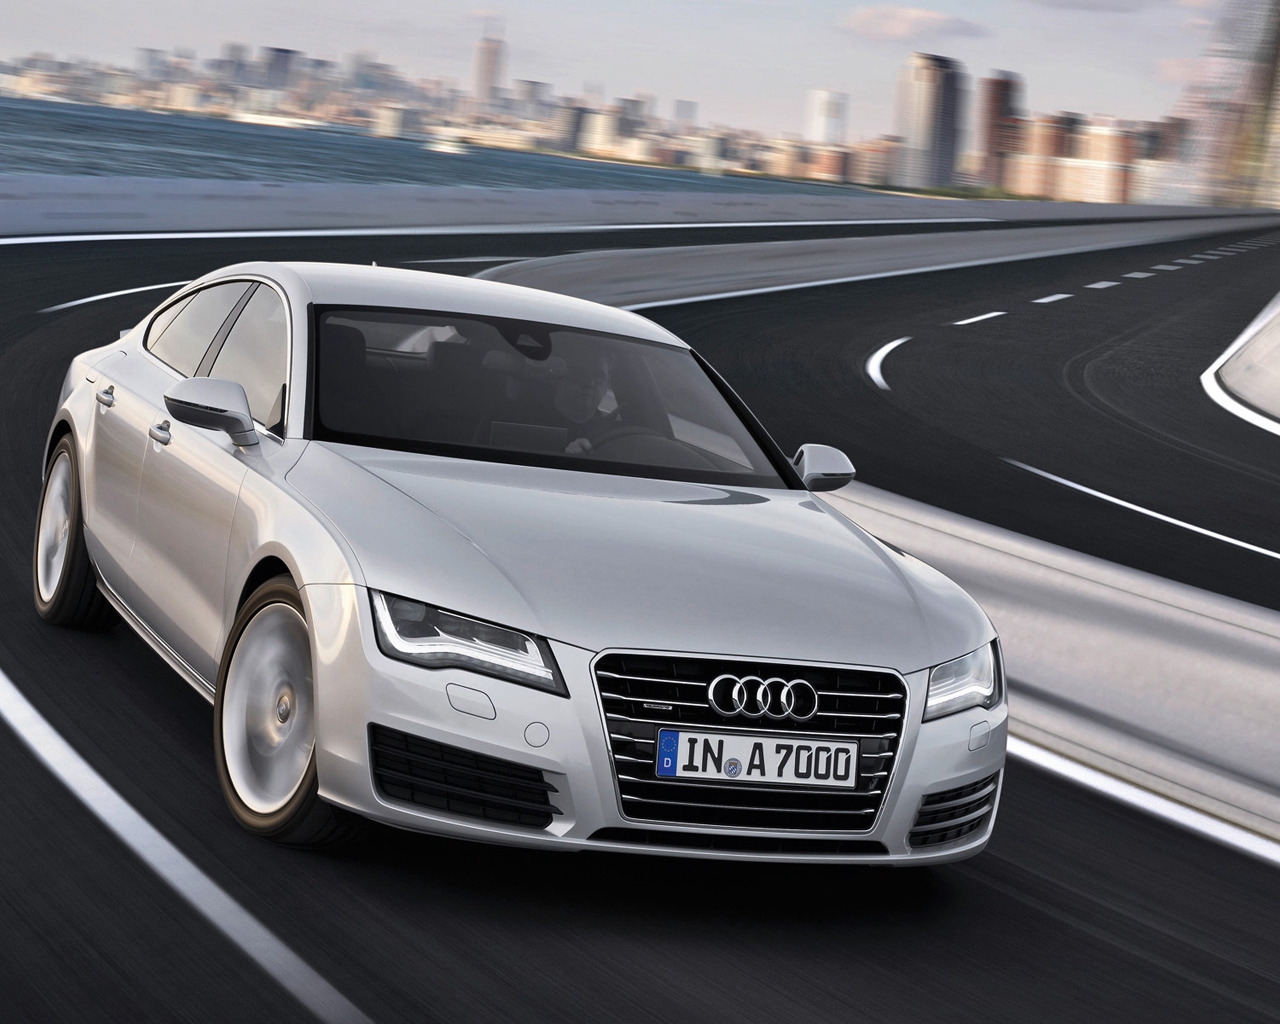 Audi A7 Sportback Speed for 1280 x 1024 resolution